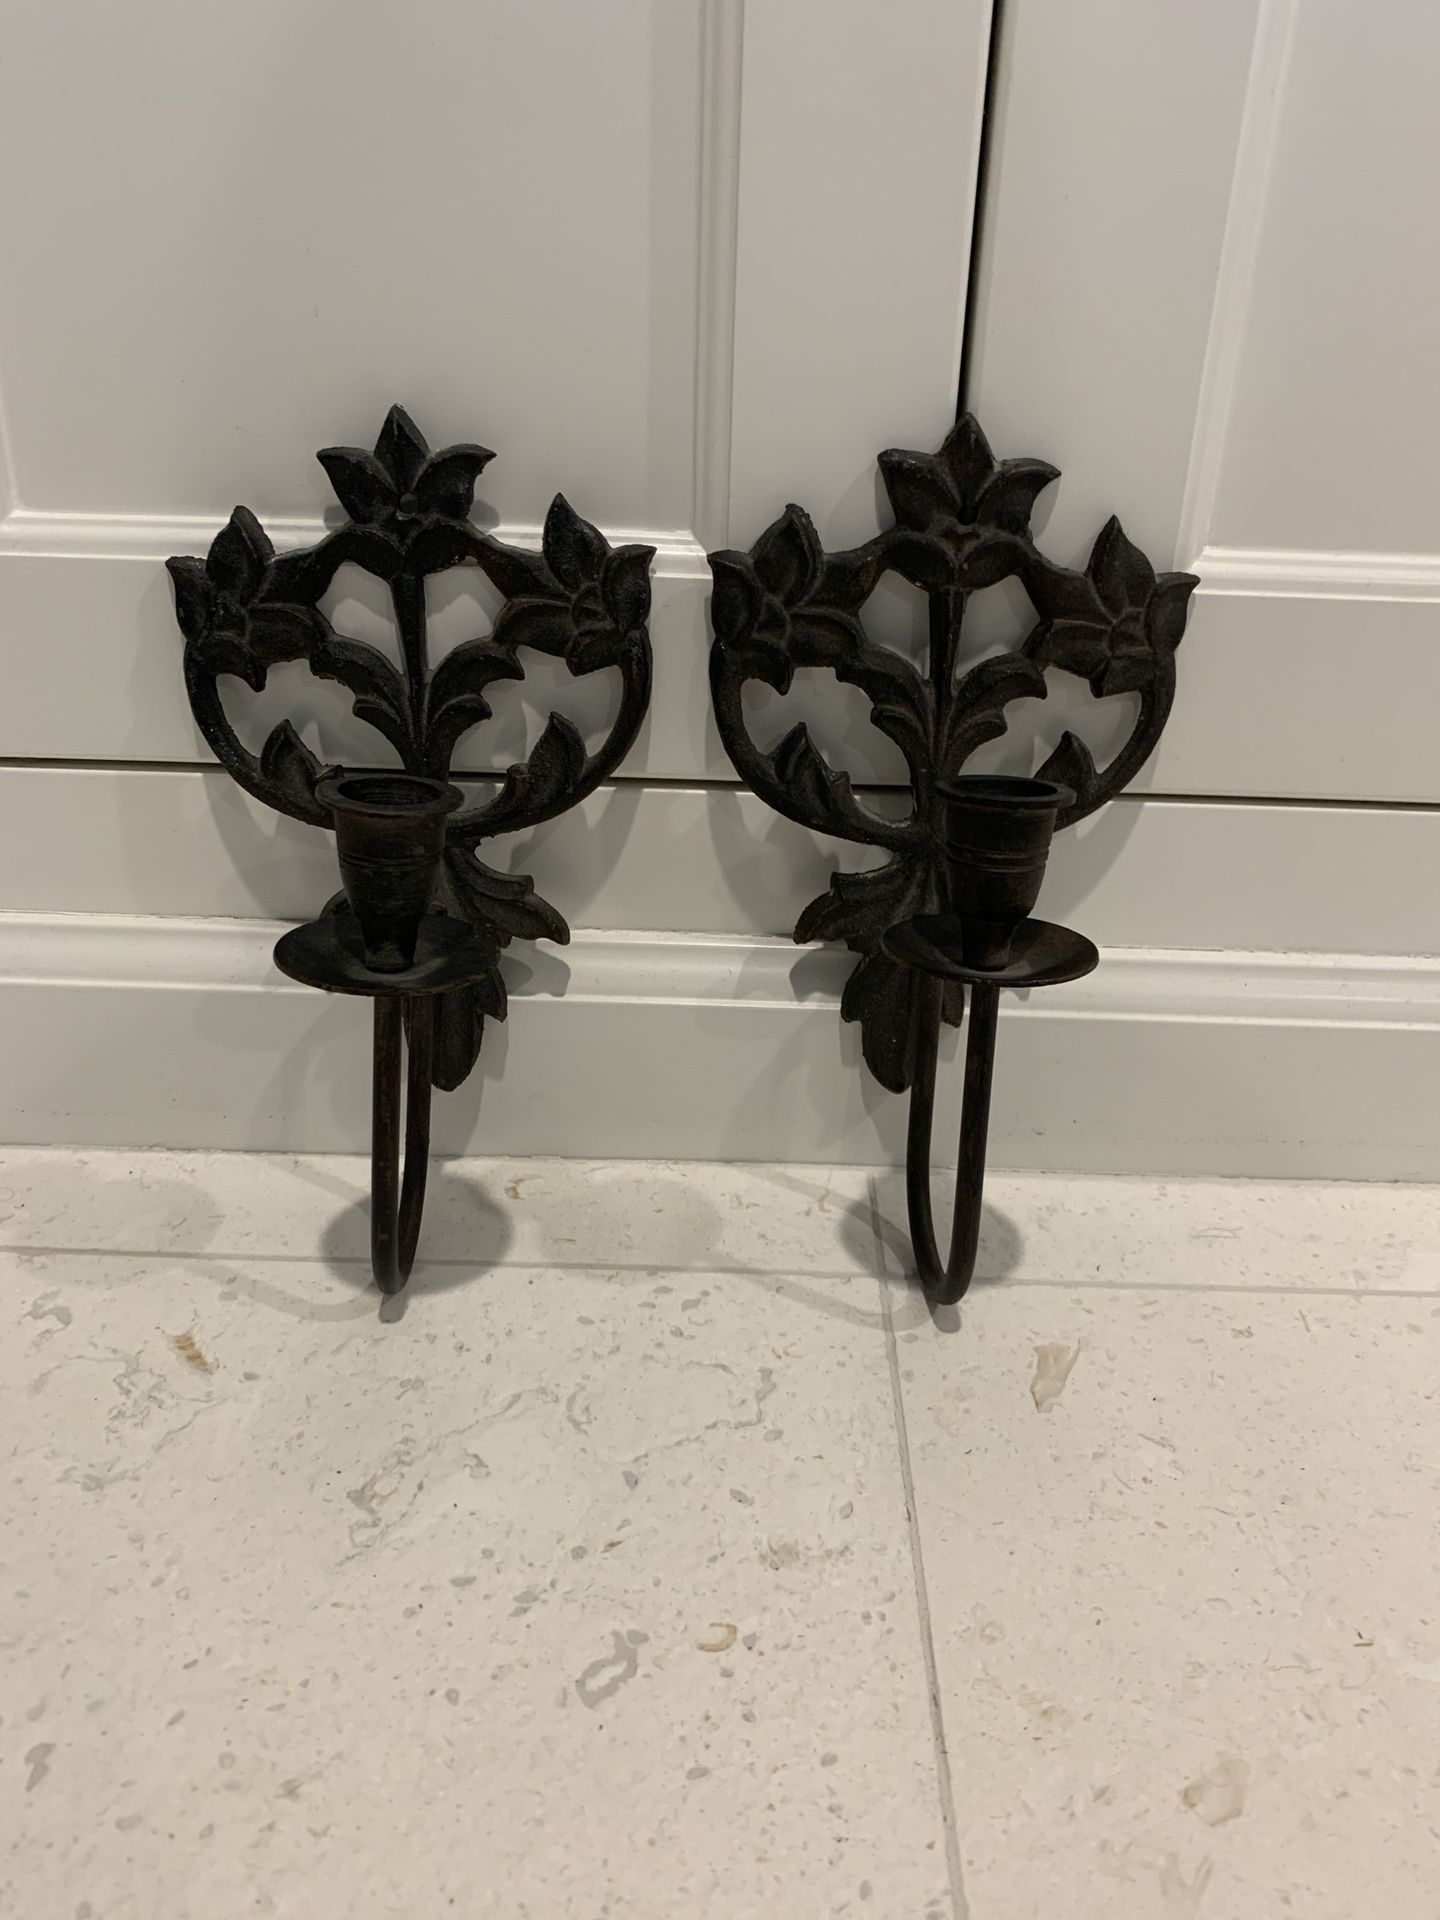 Wrought iron decorative wall candle holders